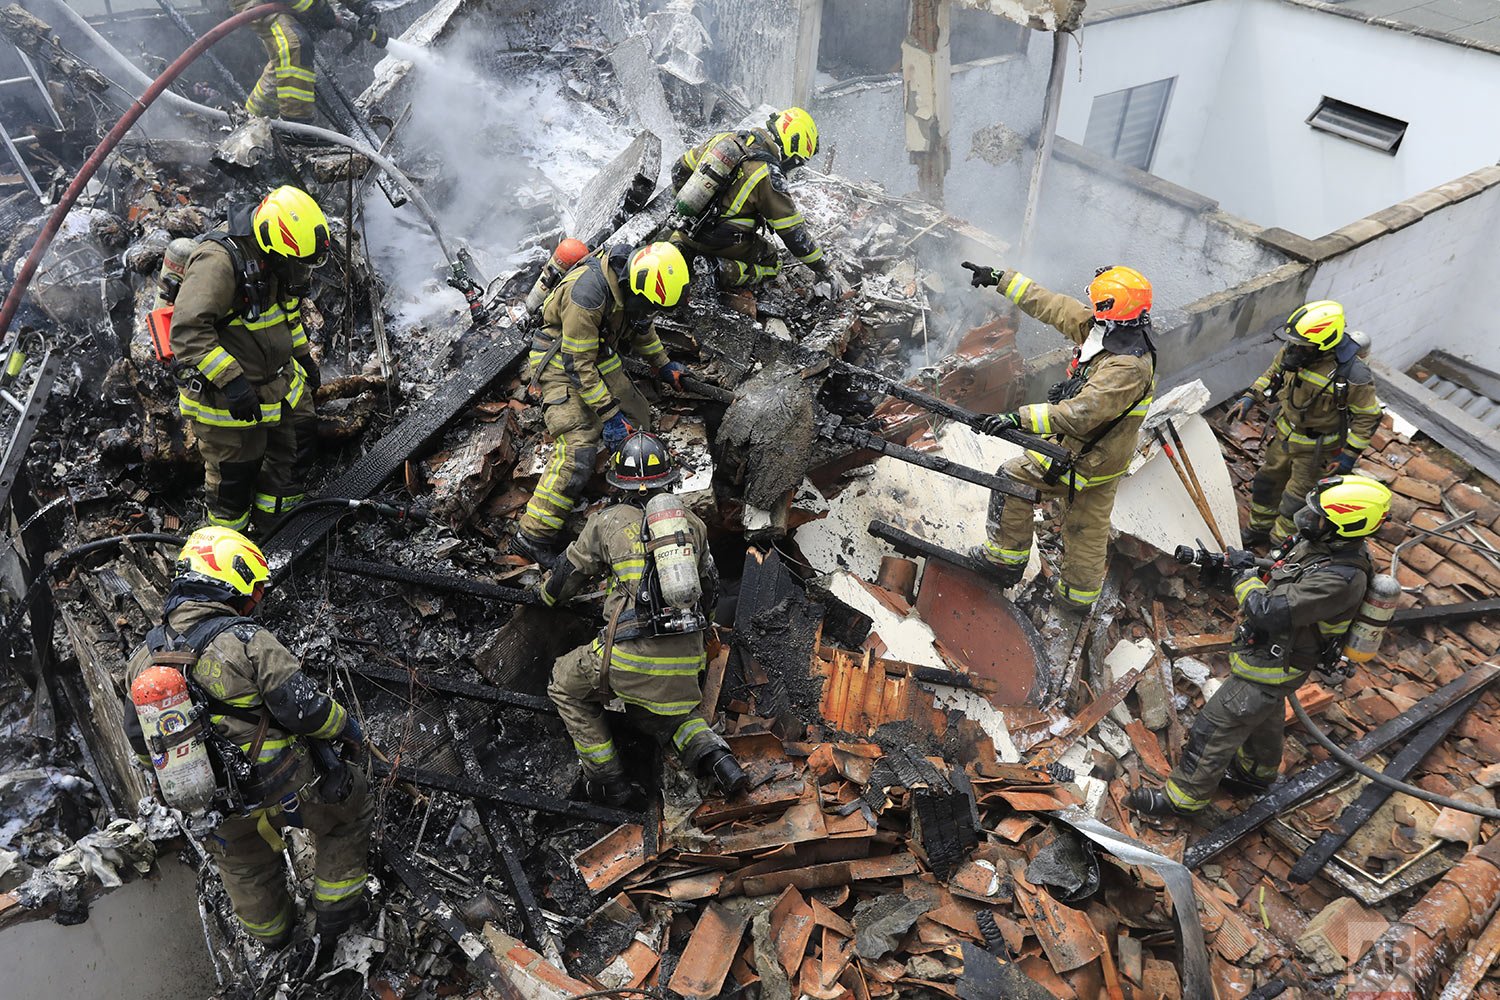  Firefighters work at the crash site of a small plane that fell on top of homes in a residential area of Medellin, Colombia, Monday, Nov. 21, 2022. (AP Photo/Jaime Saldarriaga) 